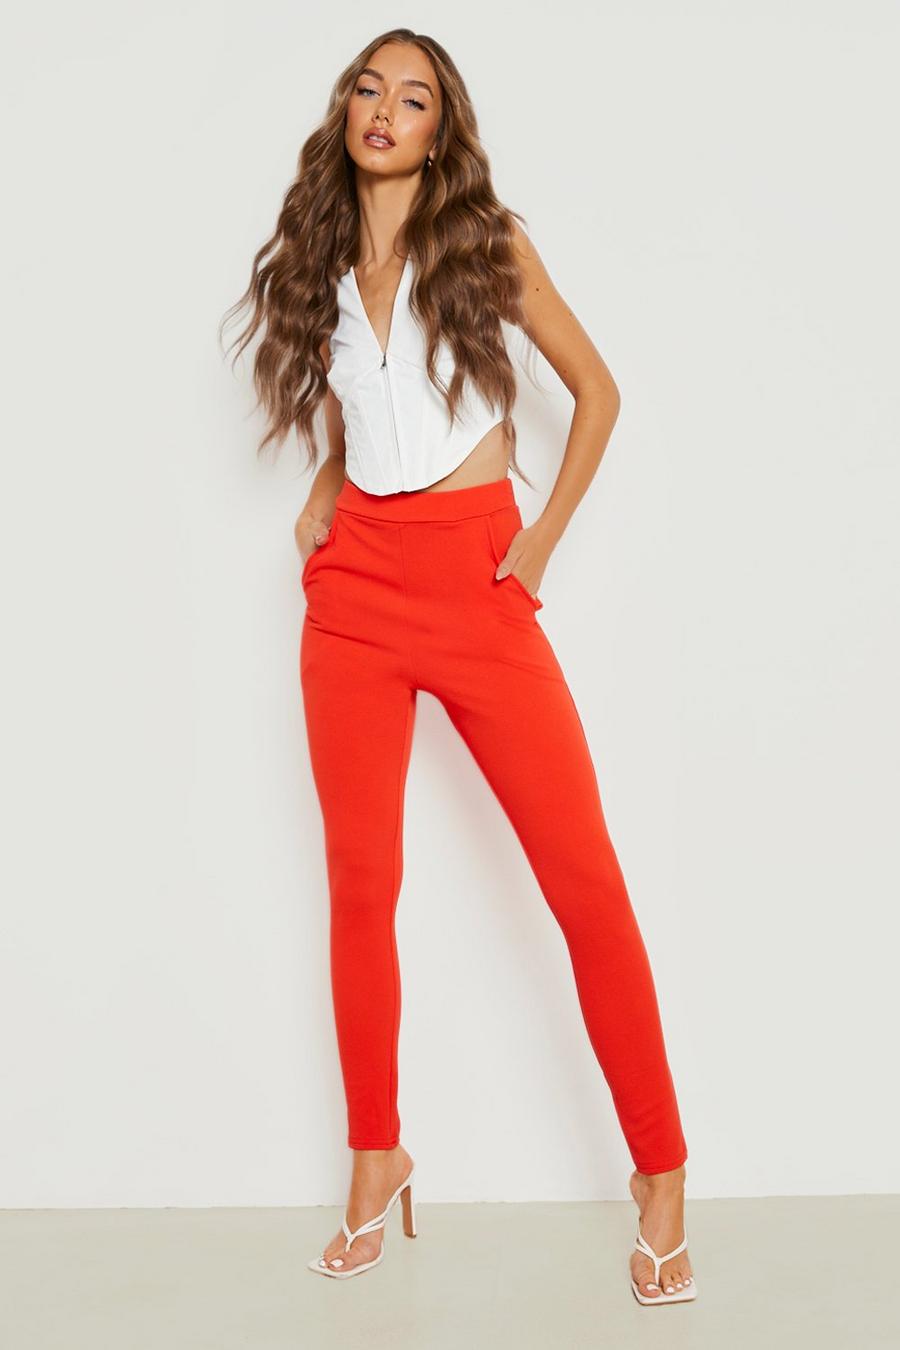 High Waisted Trousers Women Lady High Waisted Stretch Slim Pants